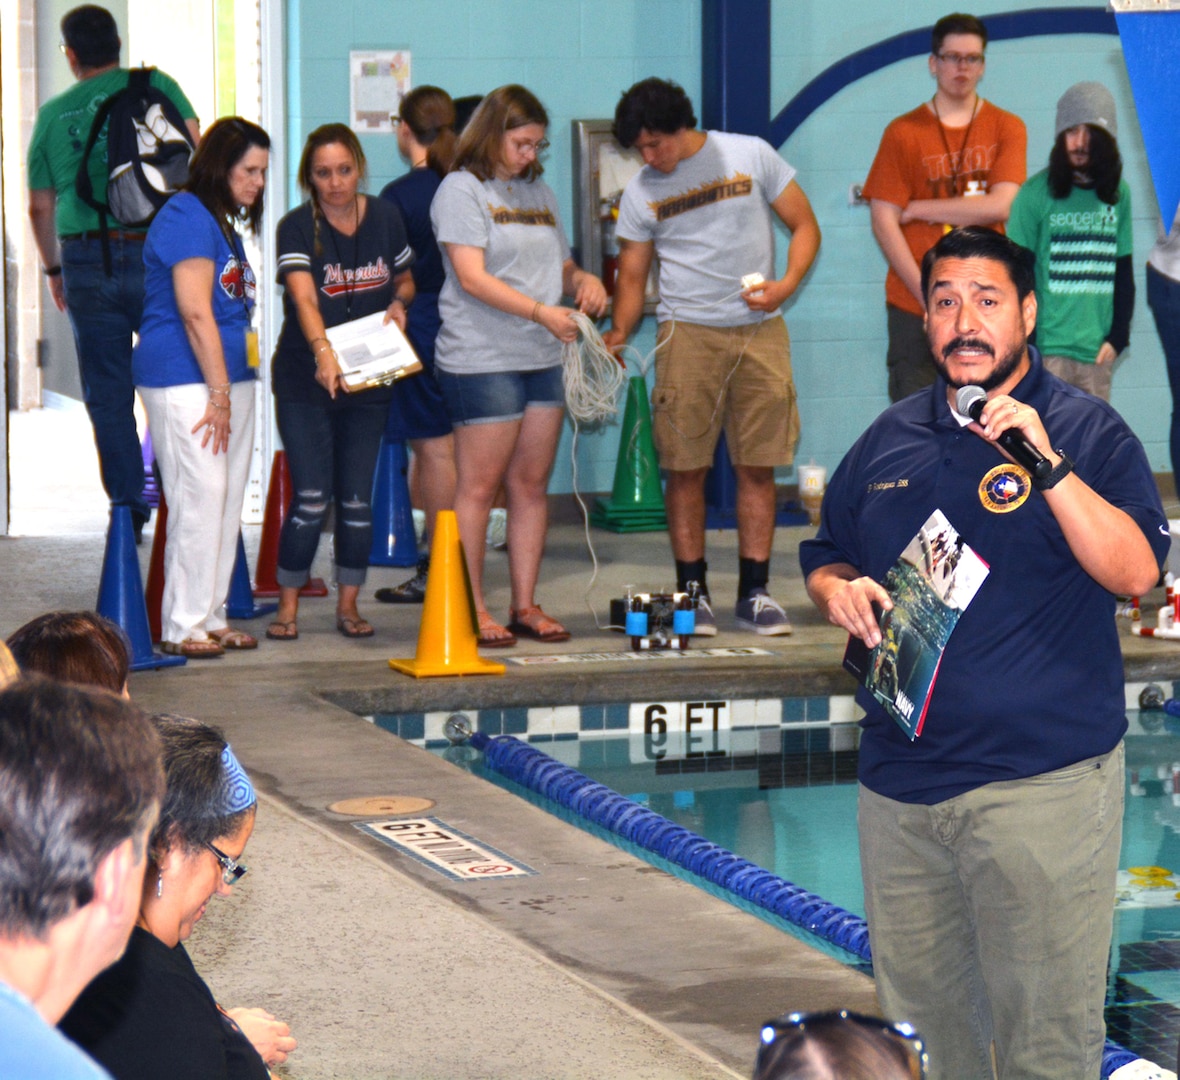 Juan P. Rodriguez, an education services specialist assigned to Navy Recruiting District San Antonio, welcomes teams, coaches and parents to the Georgetown SeaPerch Underwater Robotics Challenge Regional Competition held at the Georgetown Recreation Center. The Navy Recruiting Command Southwest Region City Outreach Program, in cooperation with the Georgetown Independent School District and NRD San Antonio, hosted the regional qualifier. The competition consisted of three evolutions: speed obstacle course, challenge course and interview/presentation.